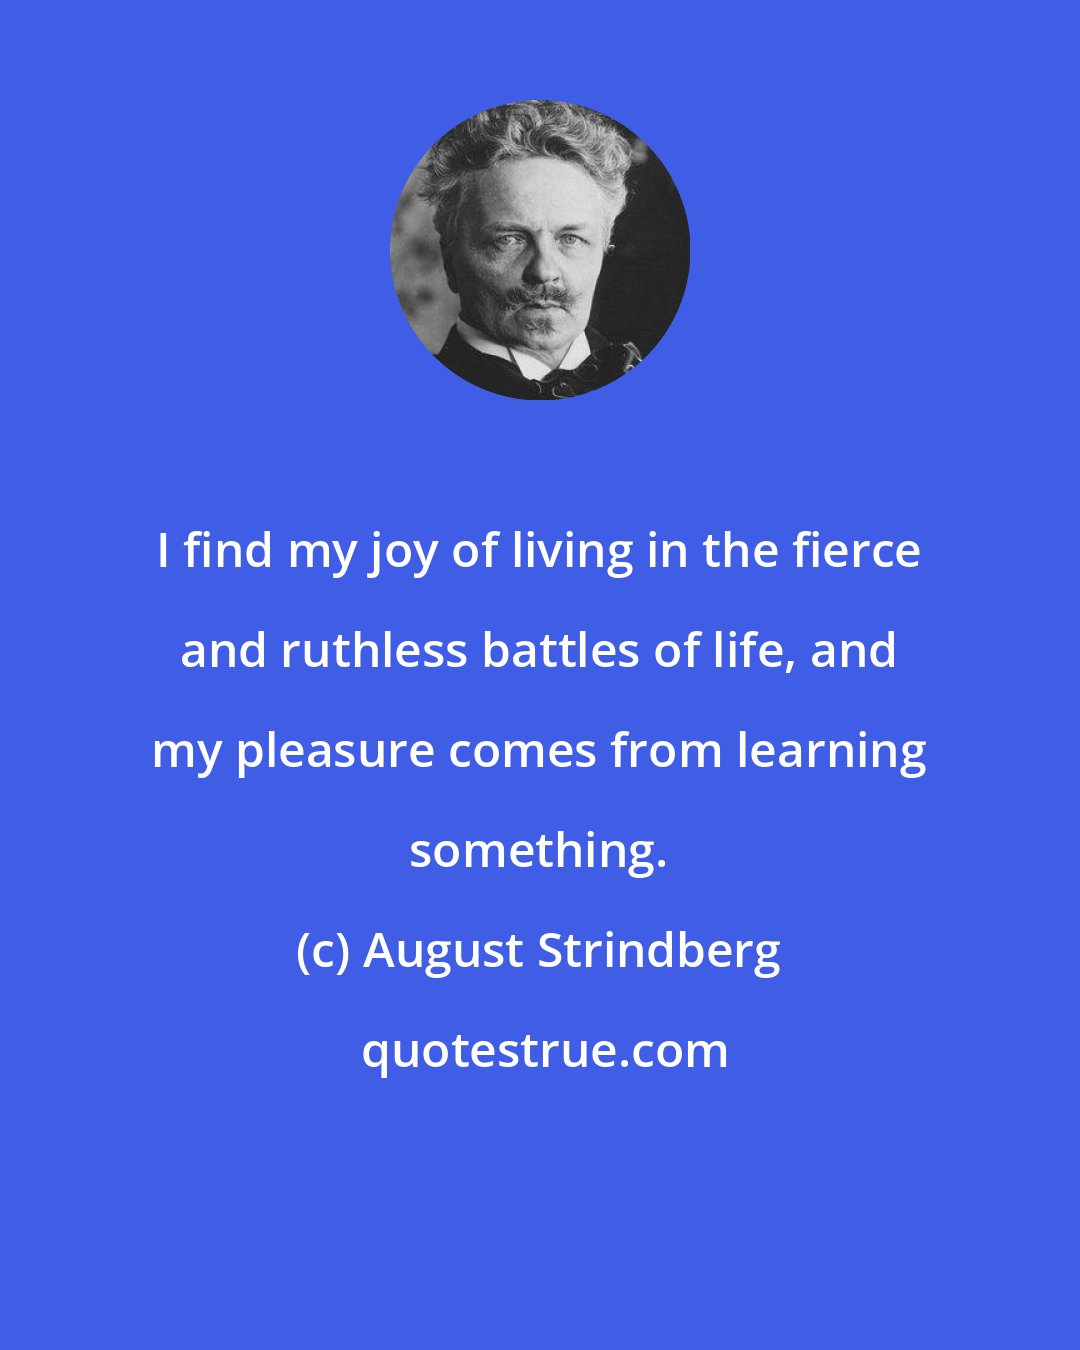 August Strindberg: I find my joy of living in the fierce and ruthless battles of life, and my pleasure comes from learning something.